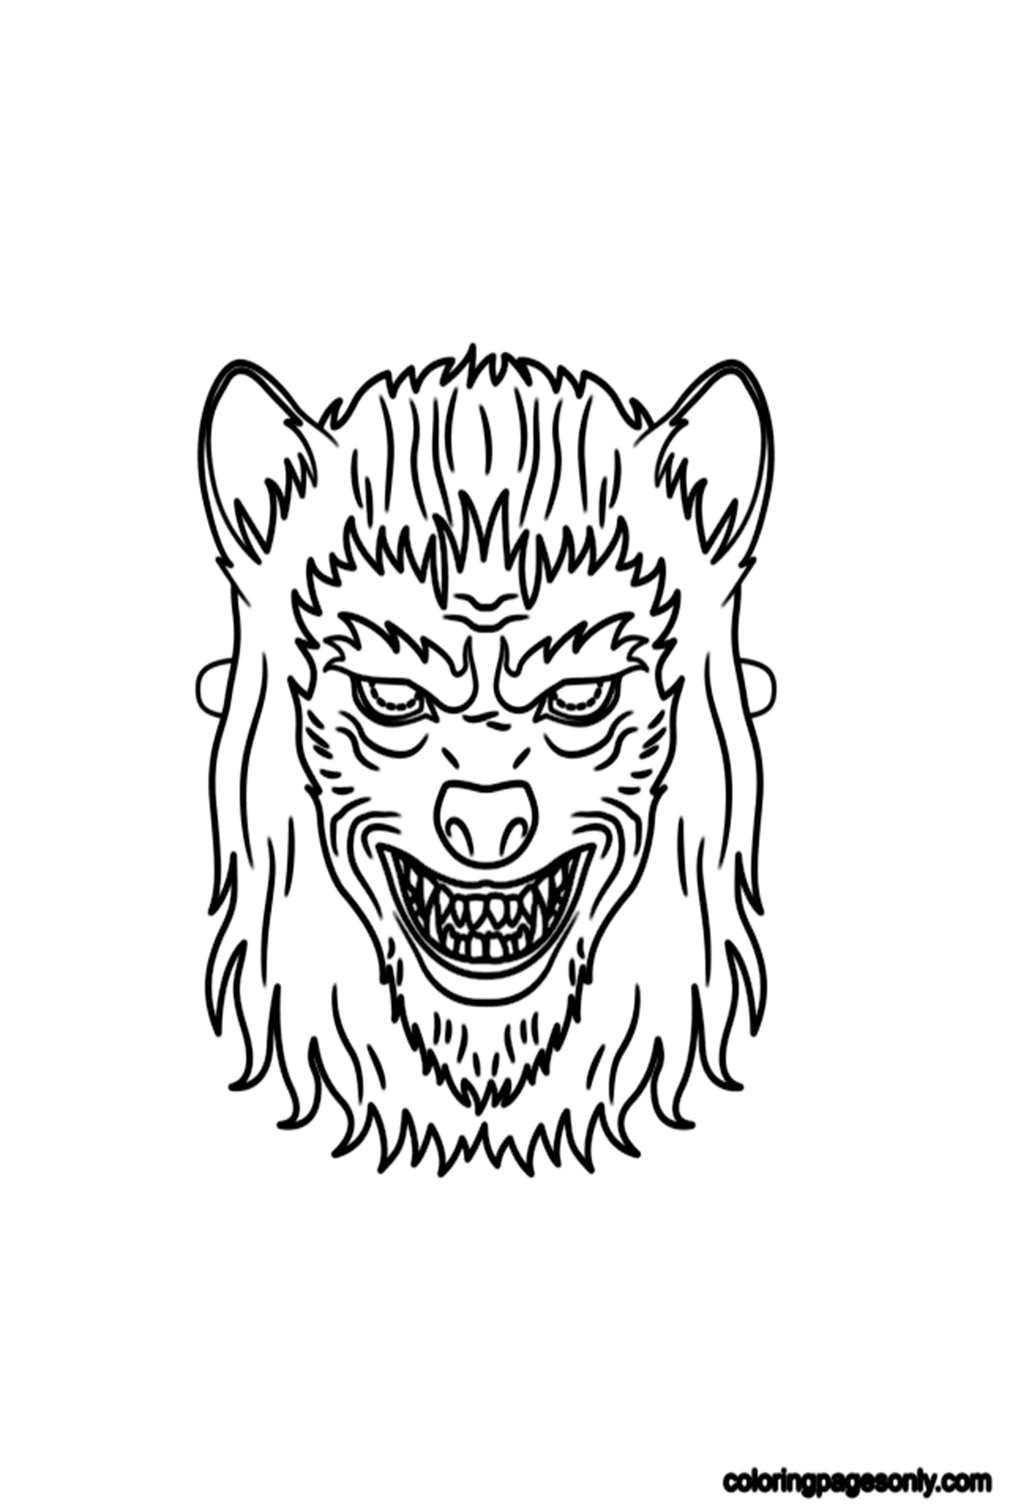 Werewolf Mask Coloring Page